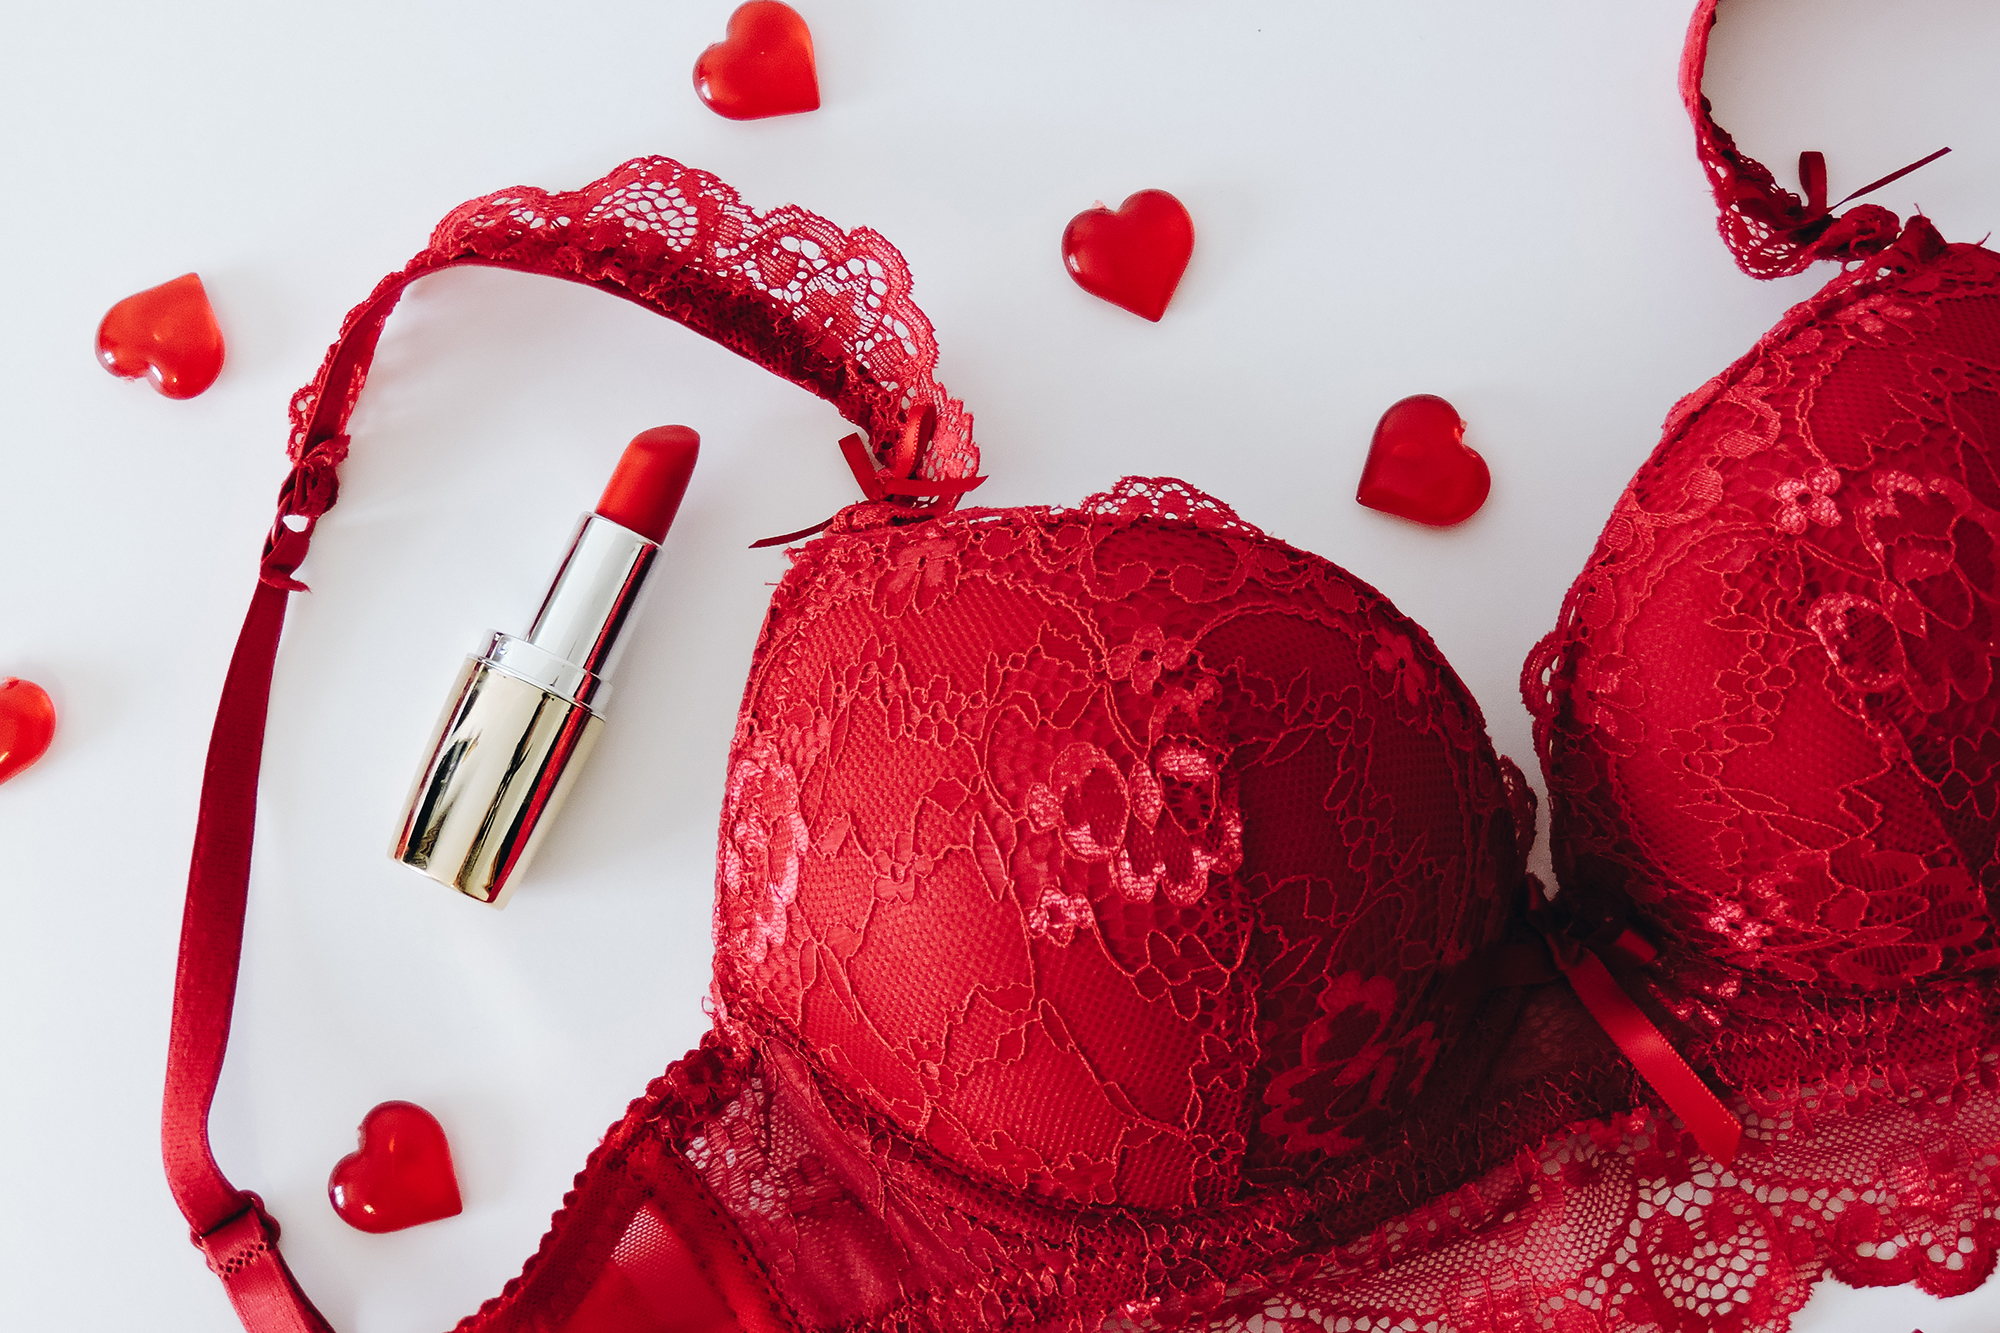 Valentines Day lingerie guide for men: Would she like it? What